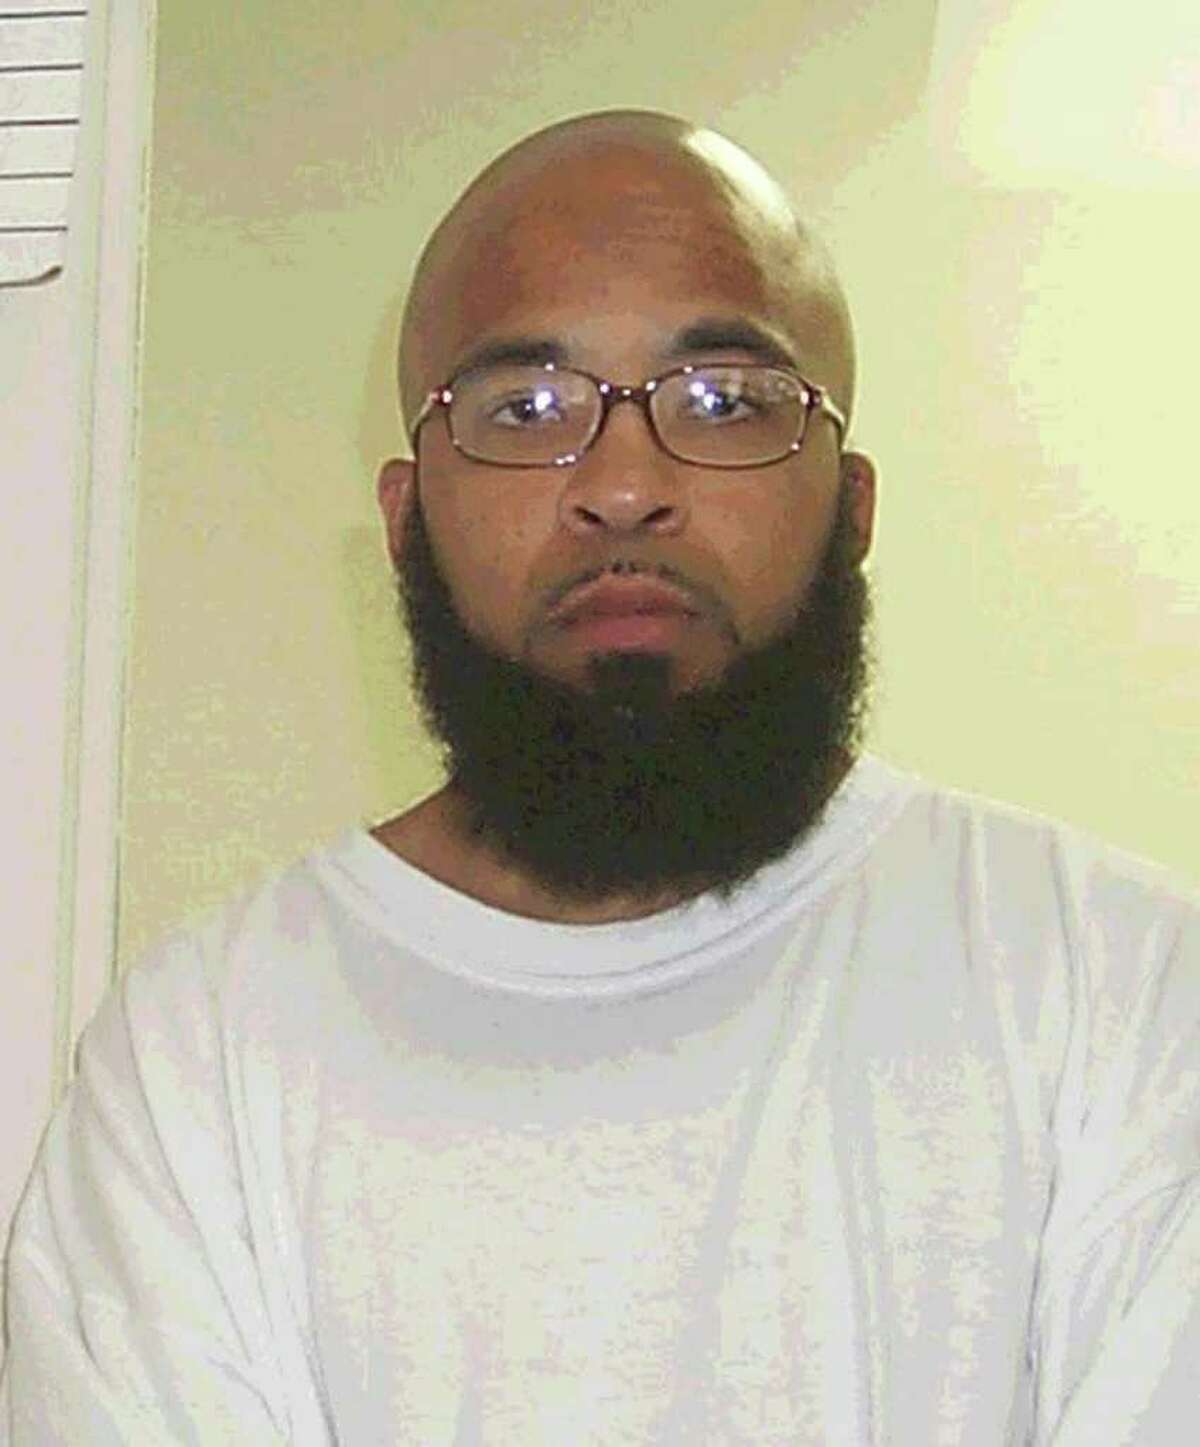 This is a 2004 photo provided by the Washington State Department of Corrections showing Abu Khalid Abdul-Latif, also known as Joseph Anthony Davis, of Seattle. Davis, and Walli Mujahidh, also known as Frederick Domingue Jr., of Los Angeles, were arrested Wednesday night, June 22, 2011. They men were arrested at a warehouse garage when they arrived to pick up machine guns to use in an alleged terror plot.